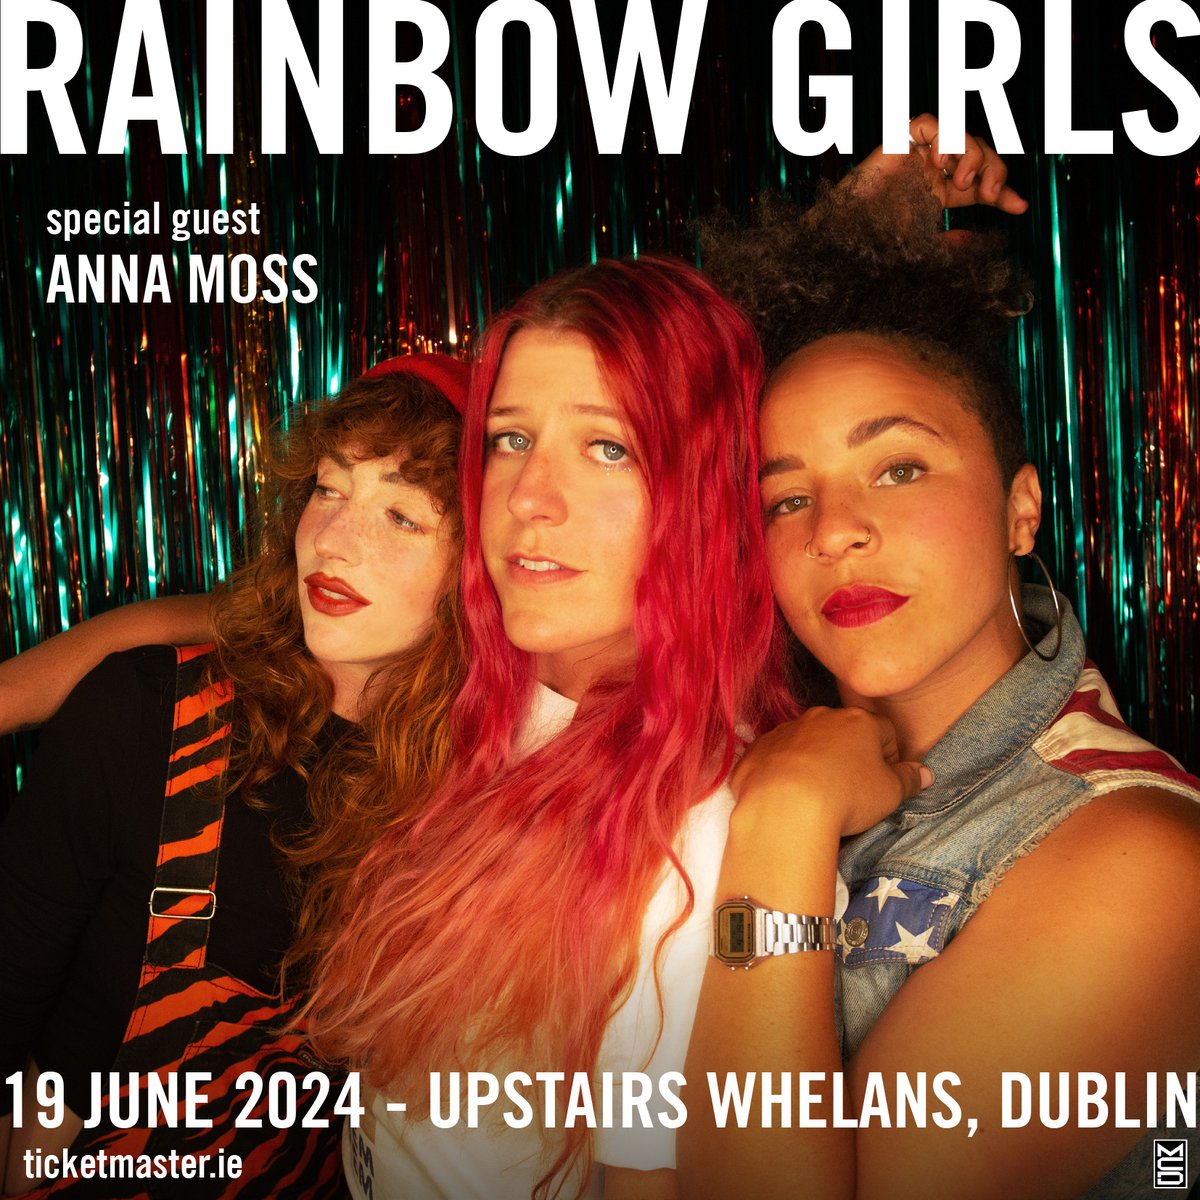 𝙎𝙐𝙋𝙋𝙊𝙍𝙏 𝘼𝘿𝘿𝙀𝘿❤️‍🔥 @rainbowgirrs have added Anna Moss as a special guest to join them at their headline show Upstairs at Whelans on June 19th! BOOK NOW 🎟️ bit.ly/Rainbow-Girls-…